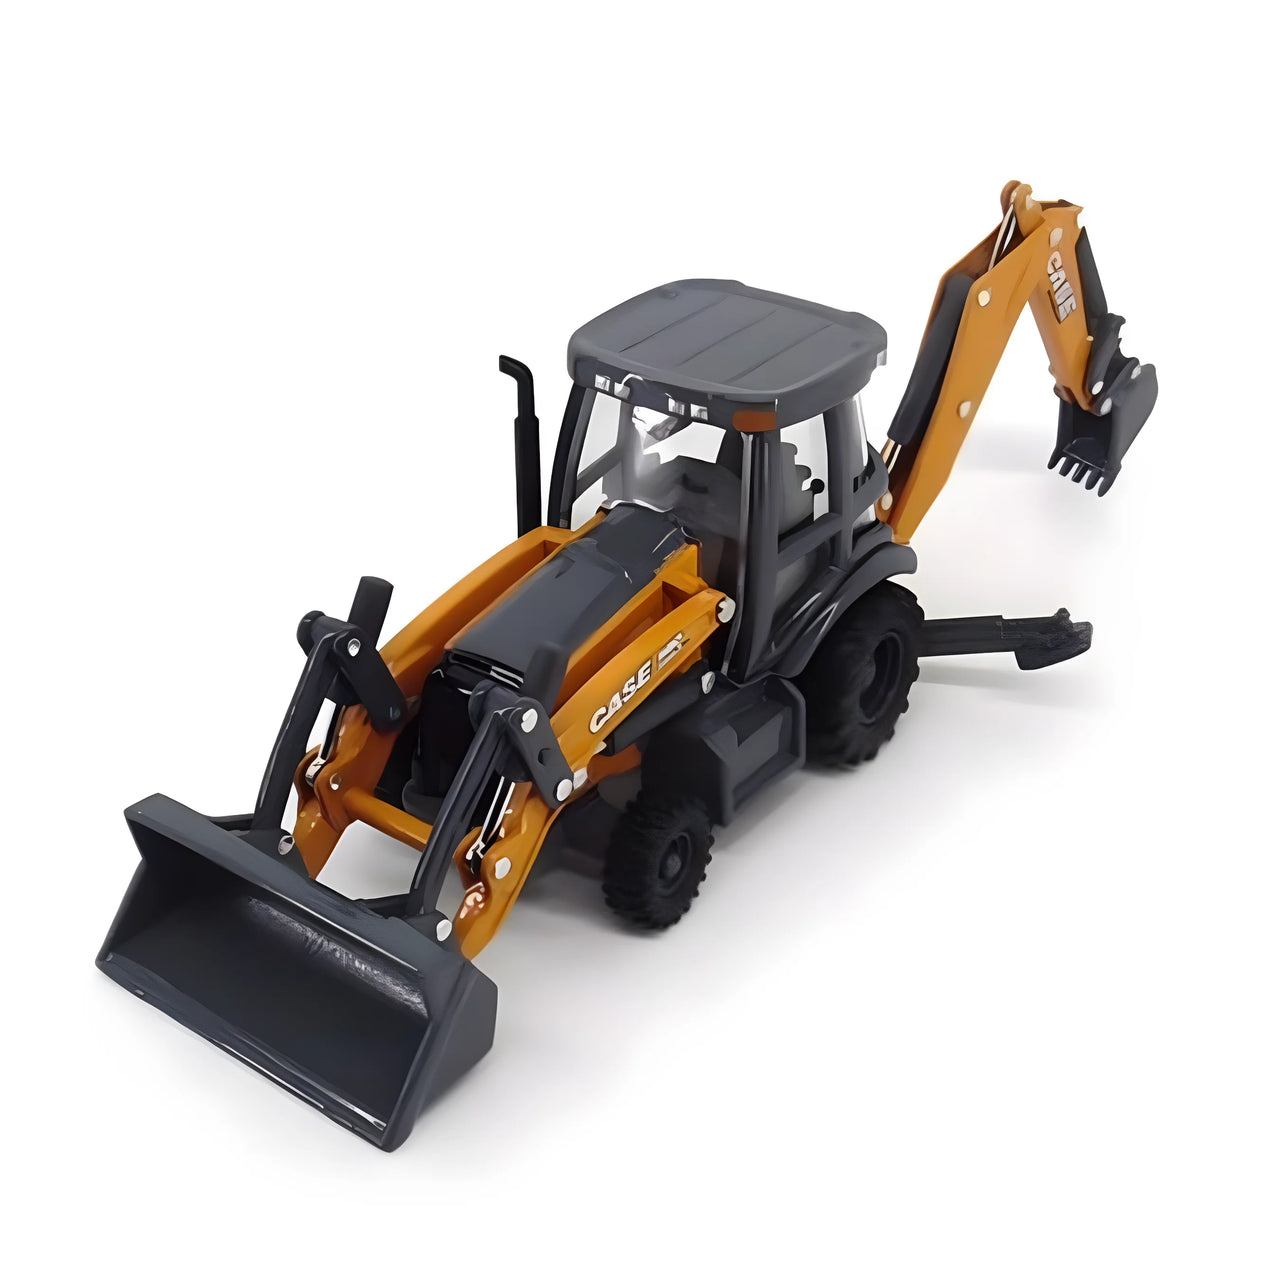 14991 Case 580 Backhoe 1:50 Scale (Discontinued Model)